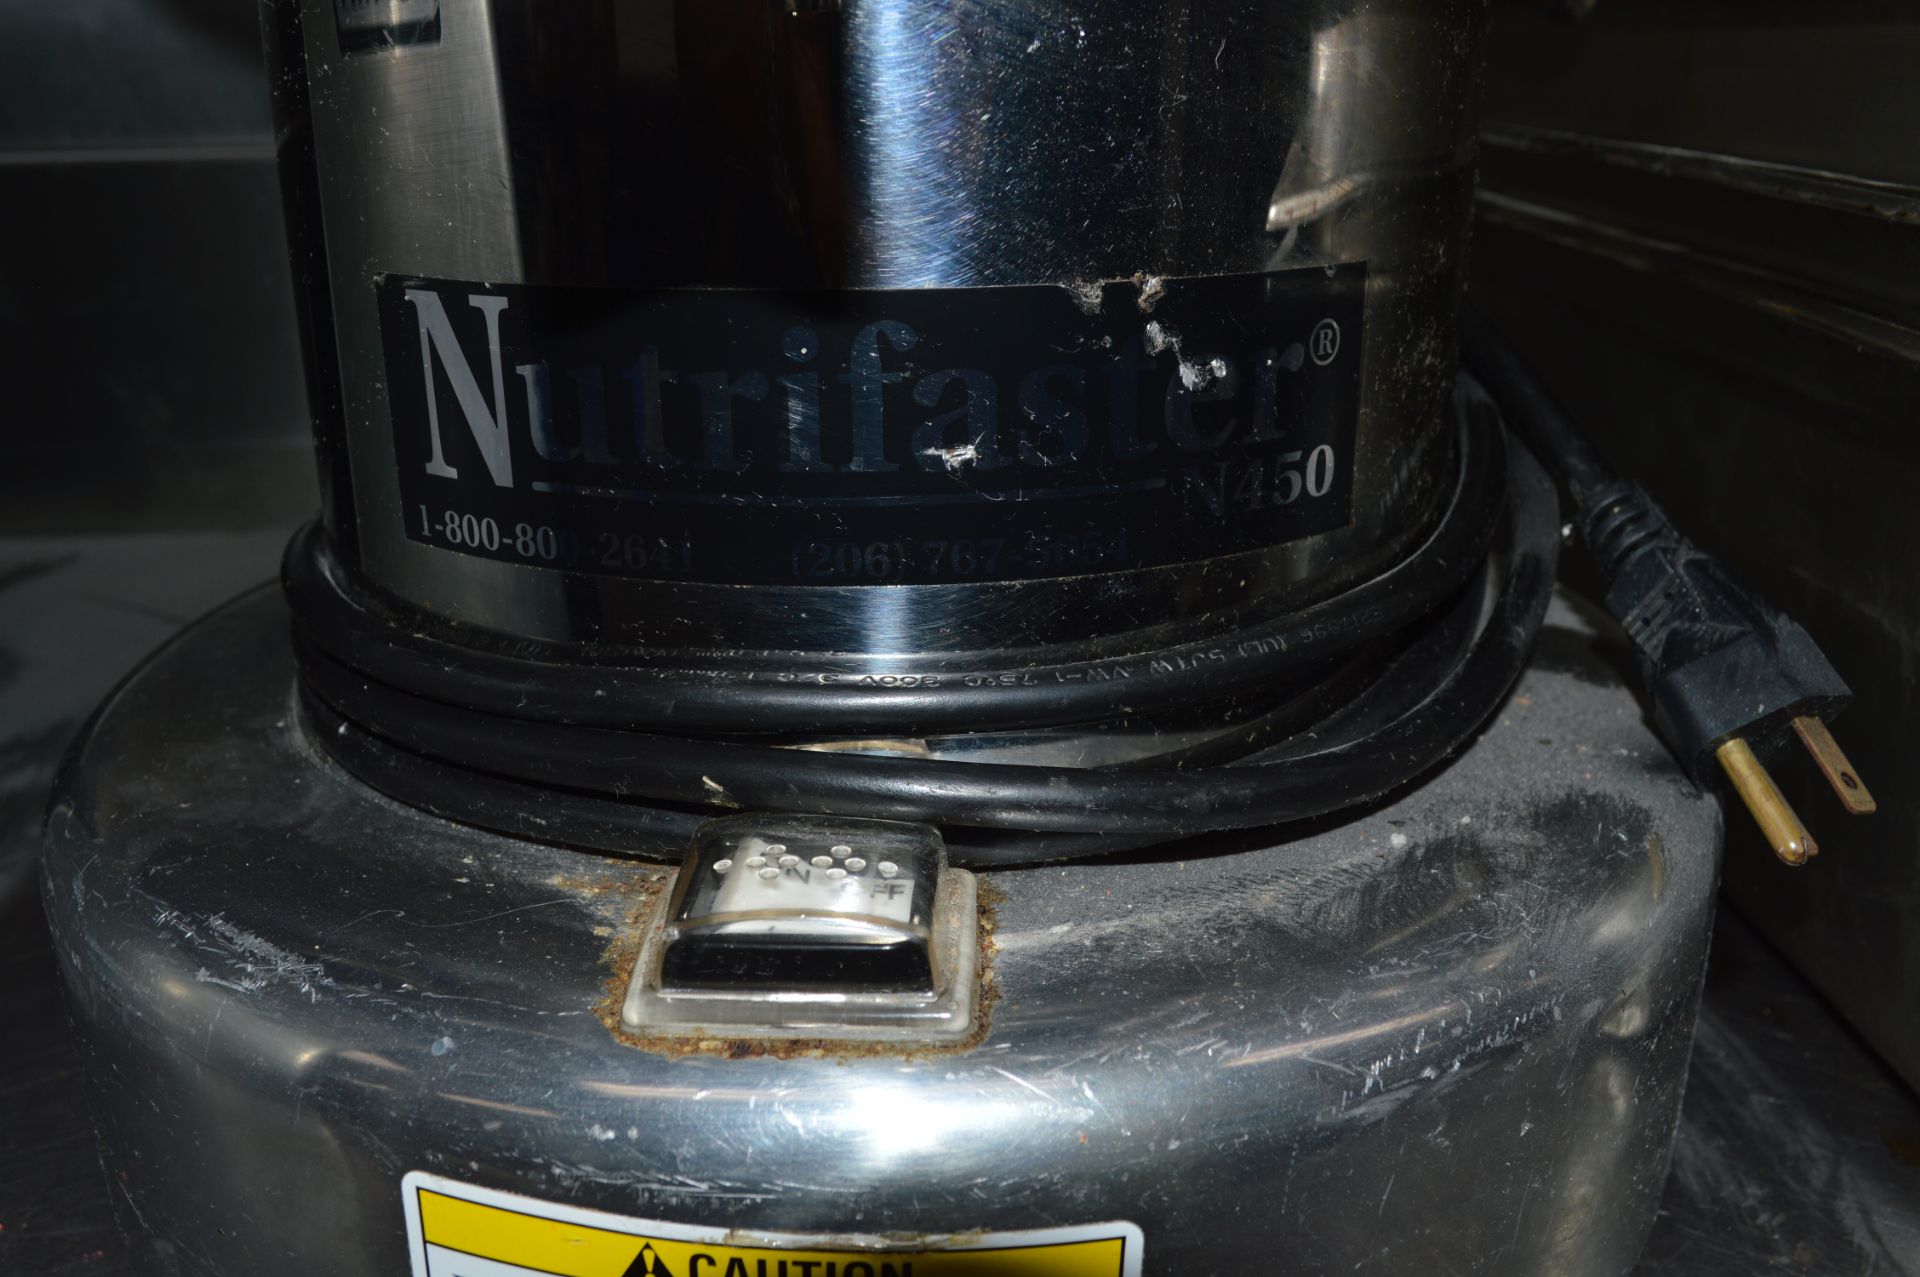 Nutrifaster Juicing Machine - Image 3 of 5